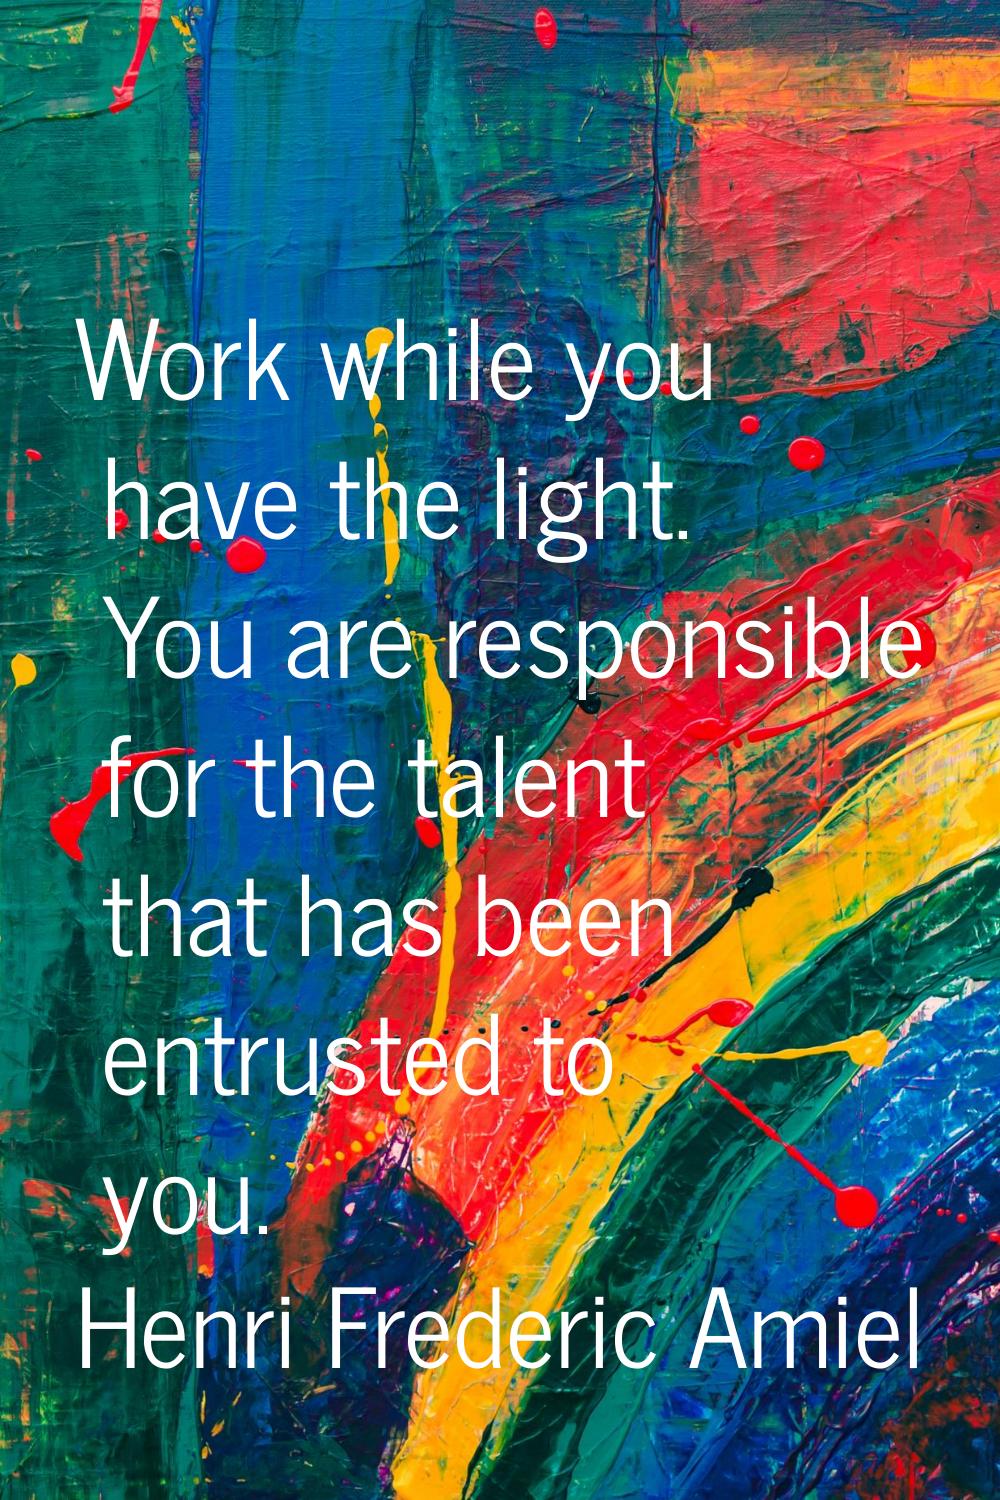 Work while you have the light. You are responsible for the talent that has been entrusted to you.